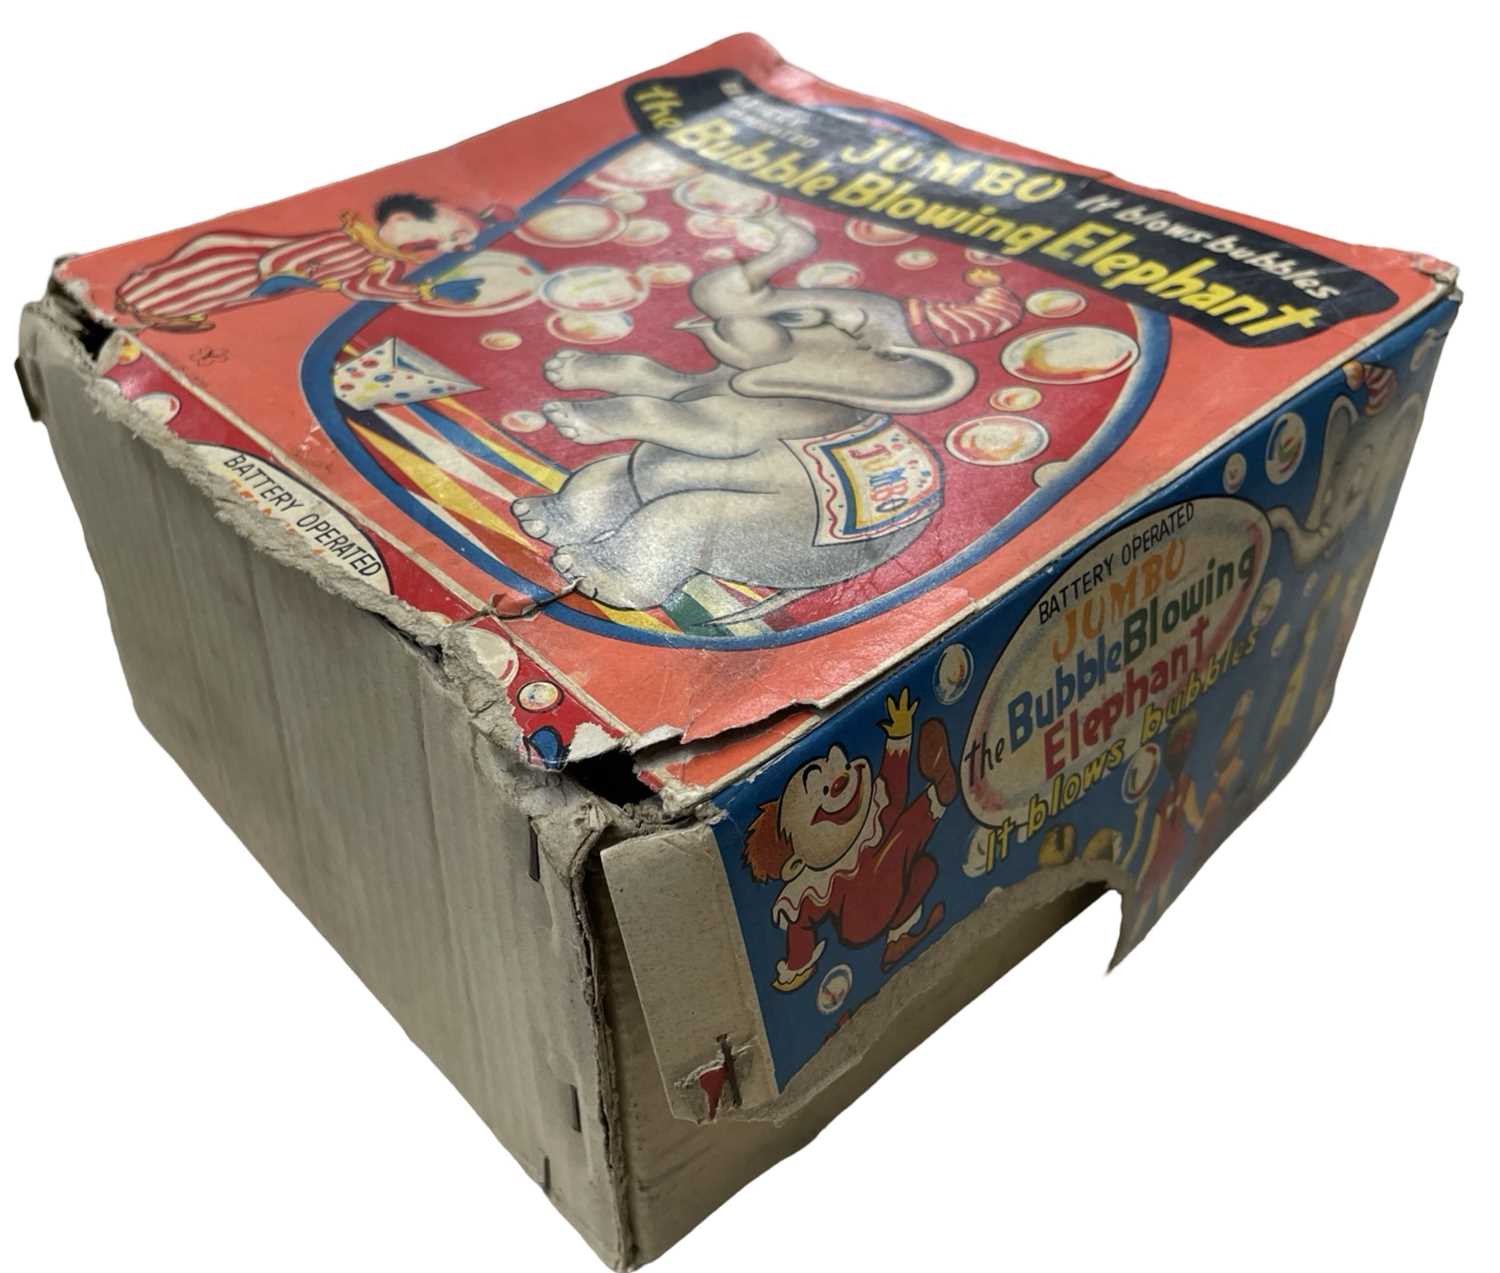 A boxed Japanese Jumbo the Bubble Blowing Elephant toy (losses to box) - Image 3 of 3